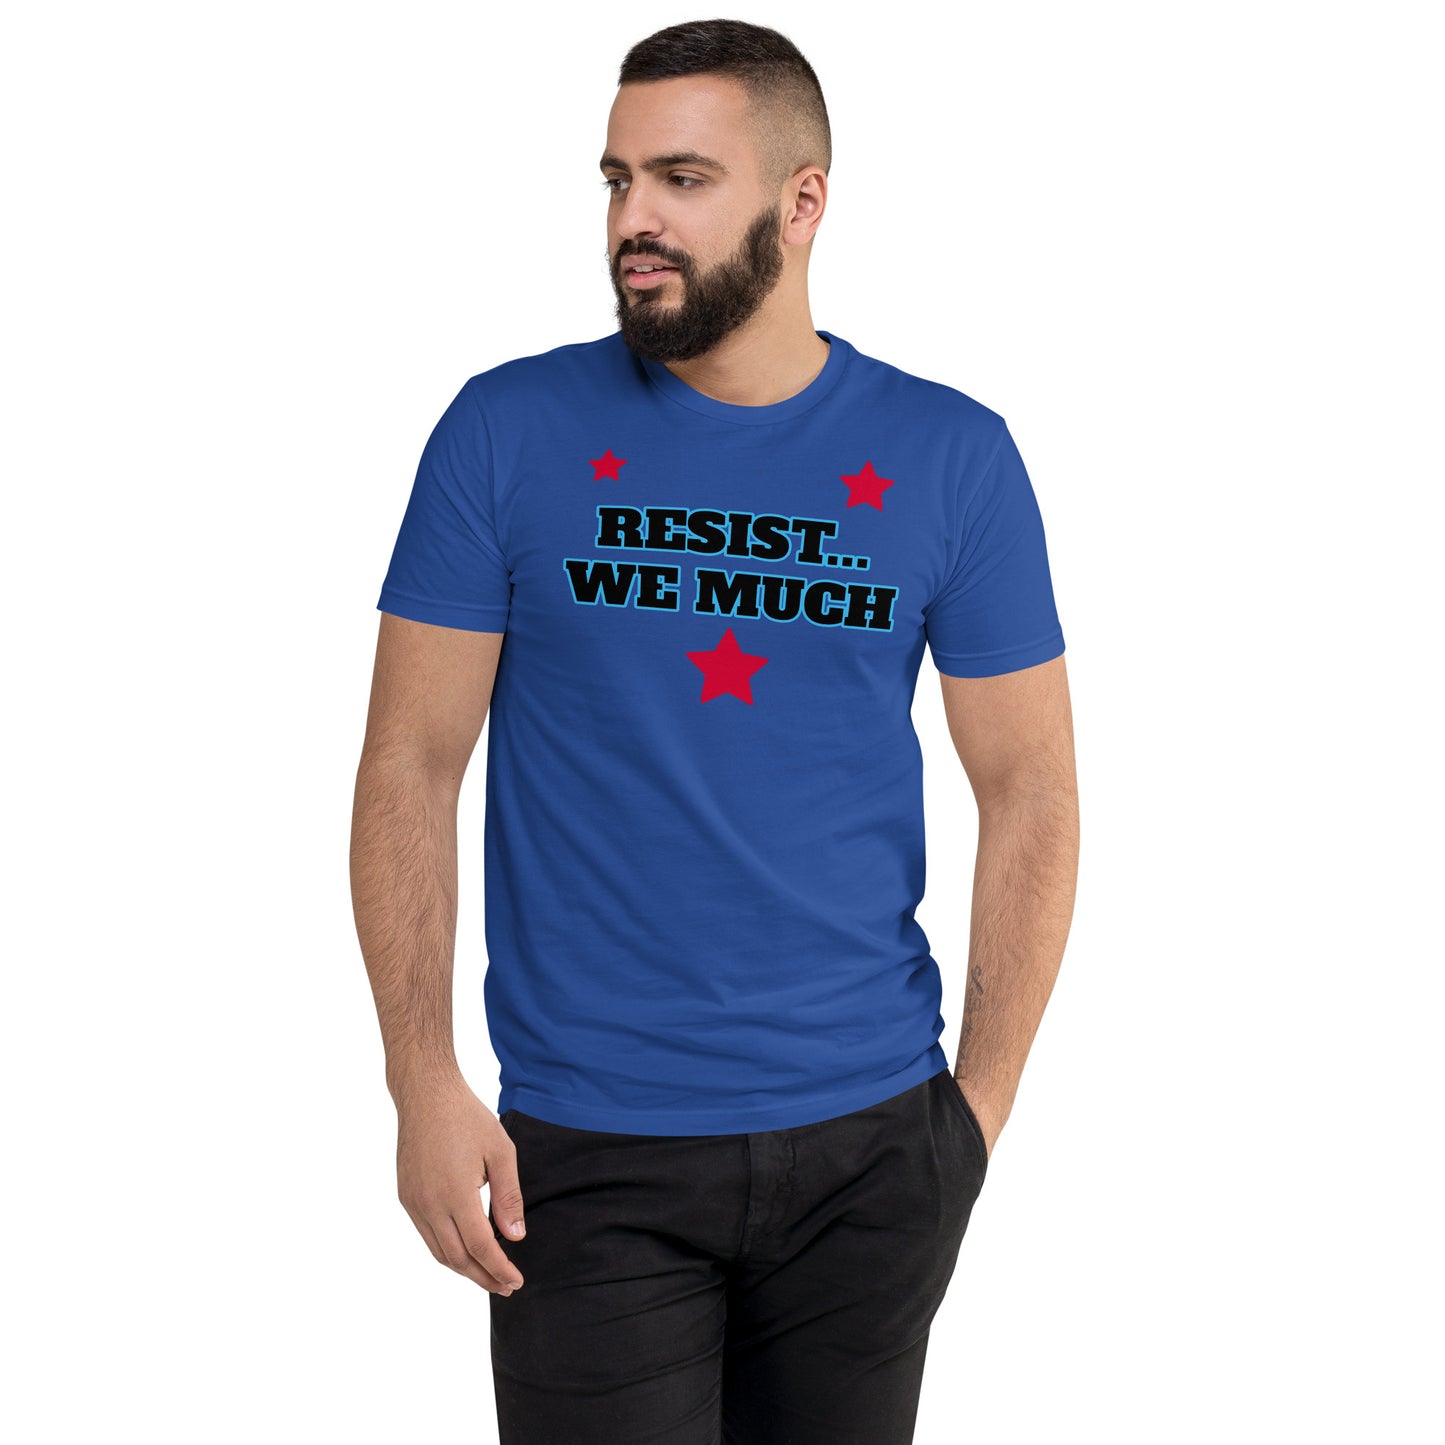 The A&G Resist We Much Tee